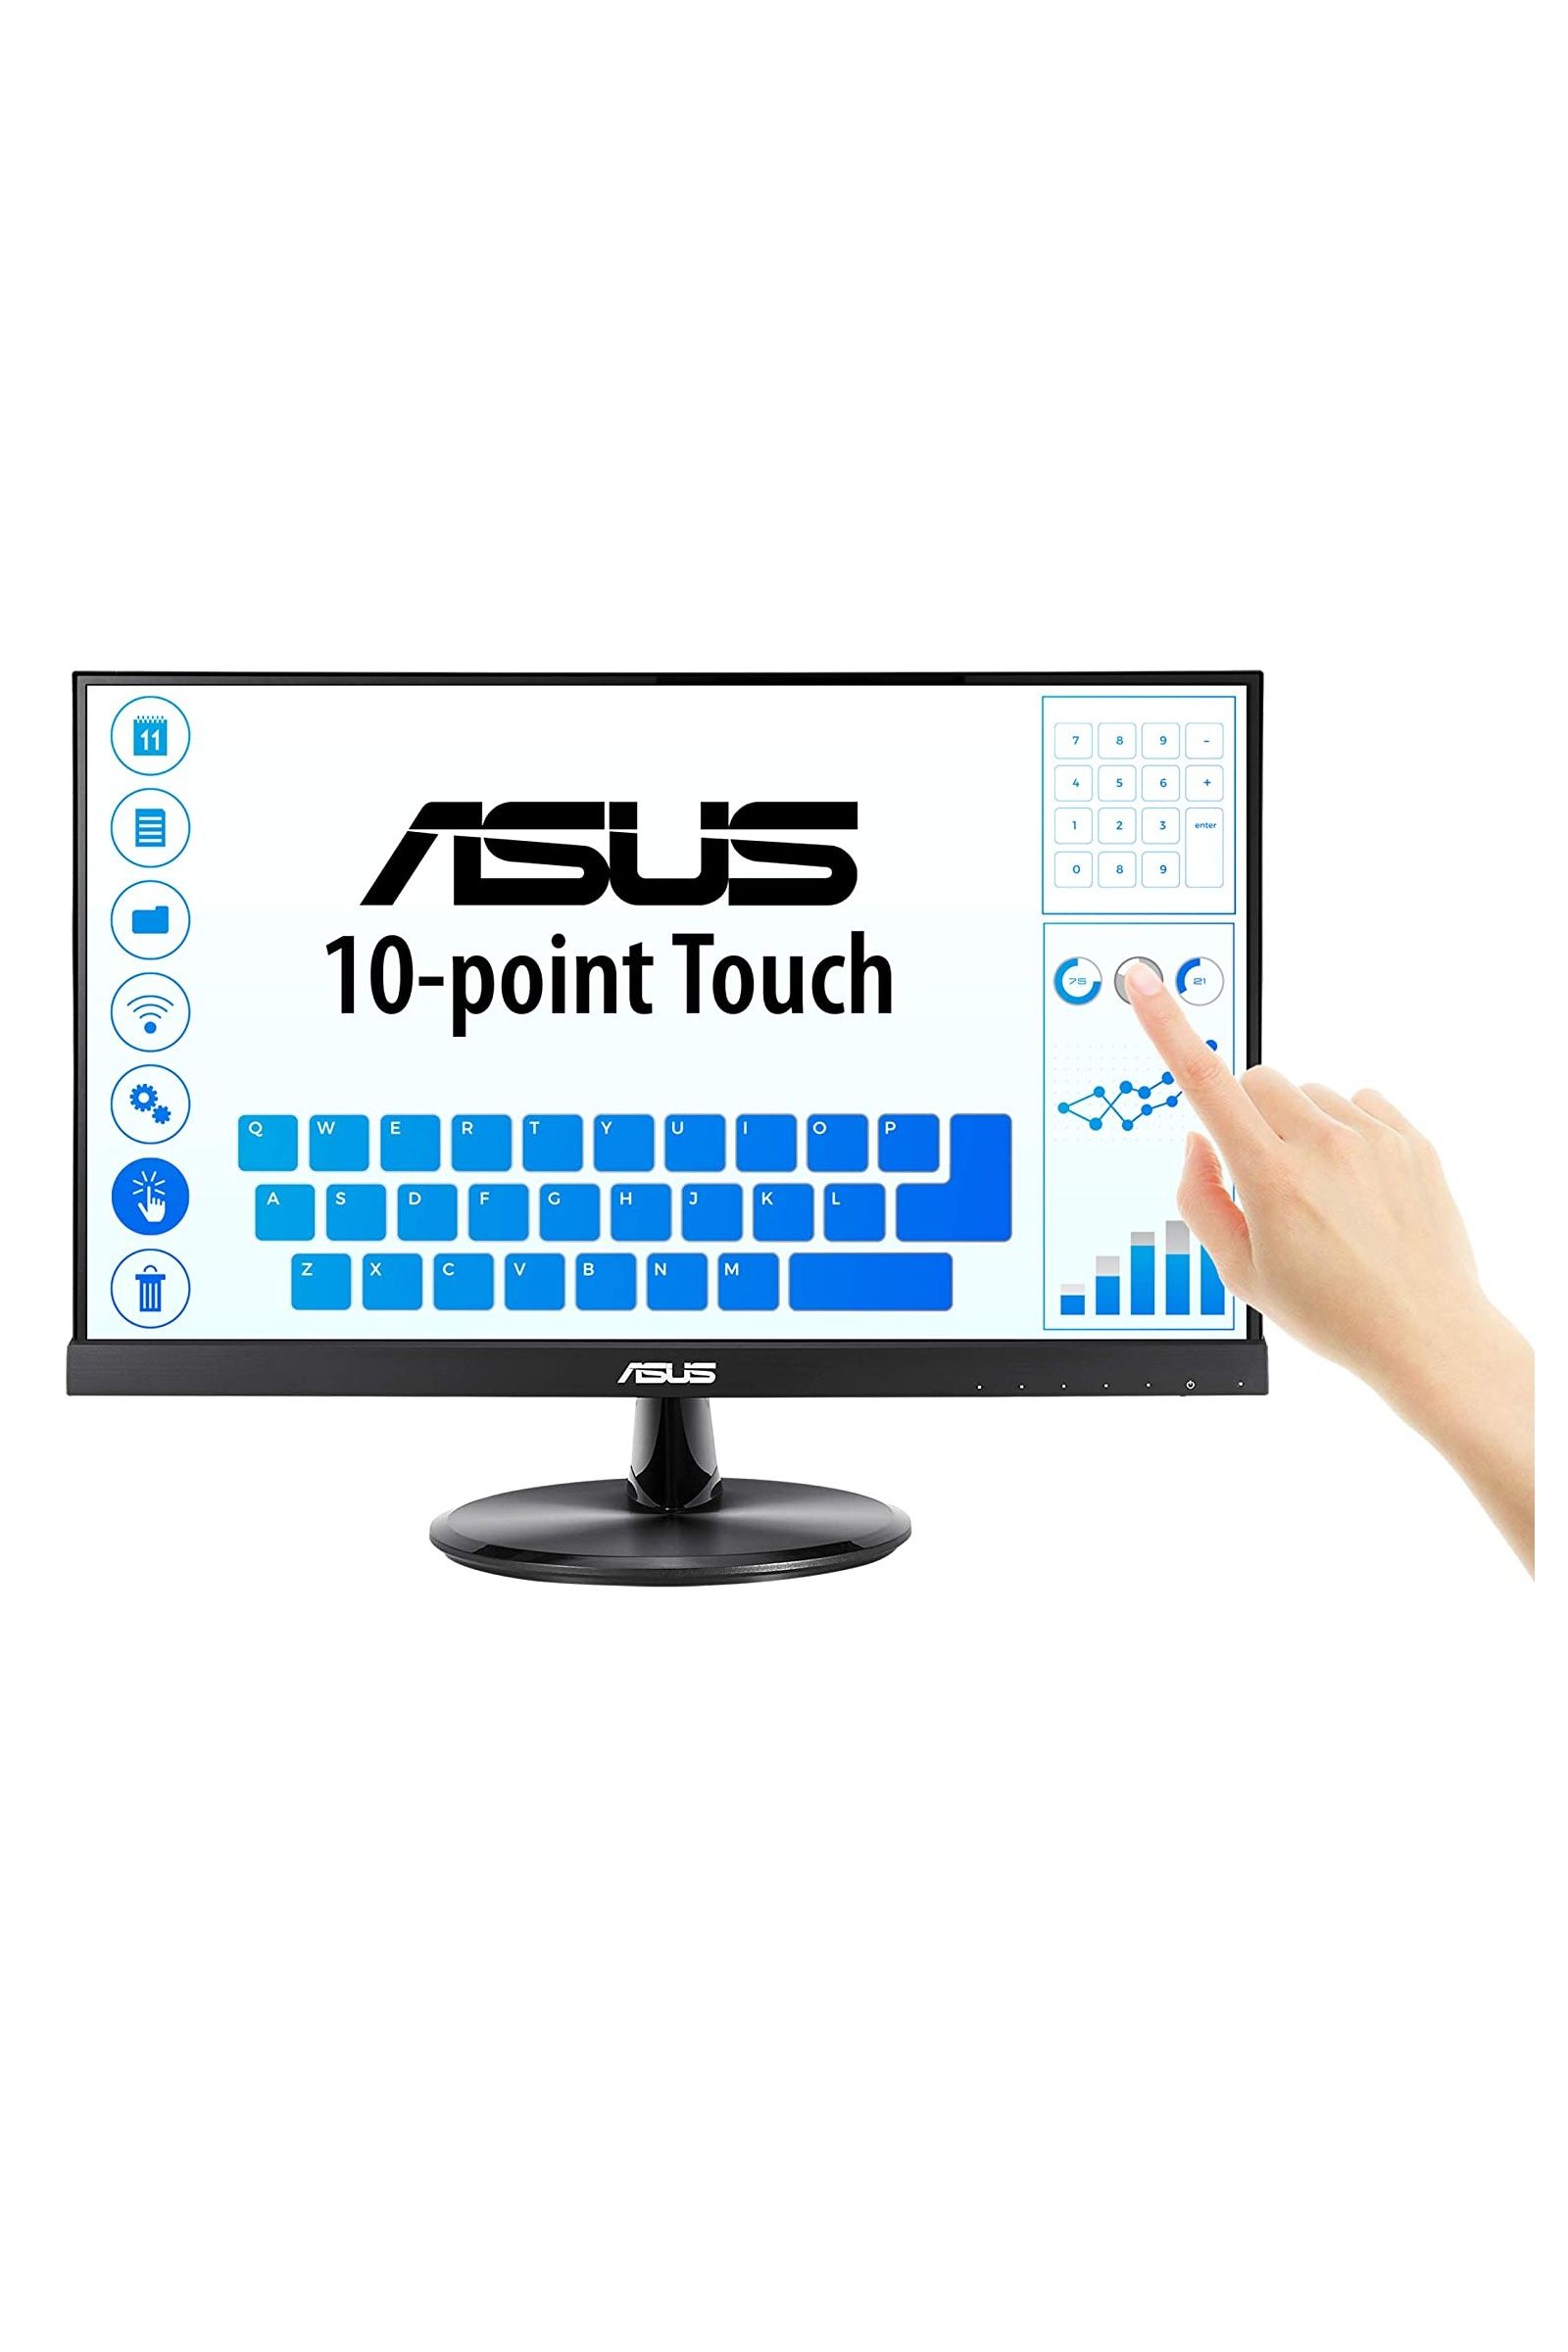 ASUS VT229H 1080P Touchscreen Monitor